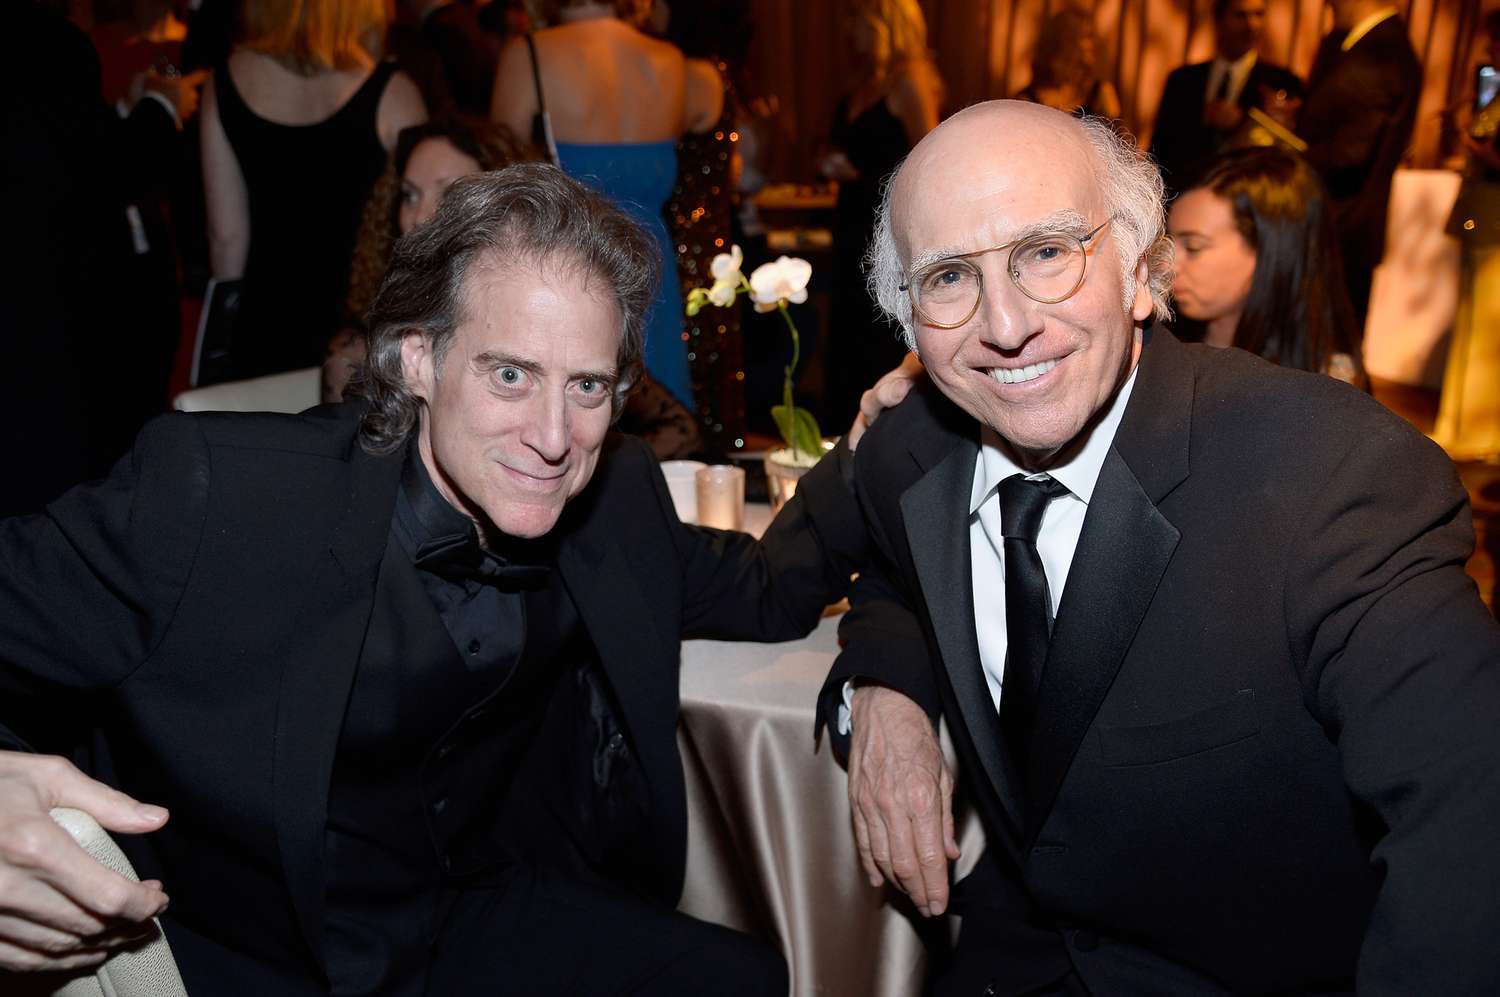 Richard Lewis Joked About Leaving Larry David 'in My Will' on Curb Your Enthusiasm Before His Death